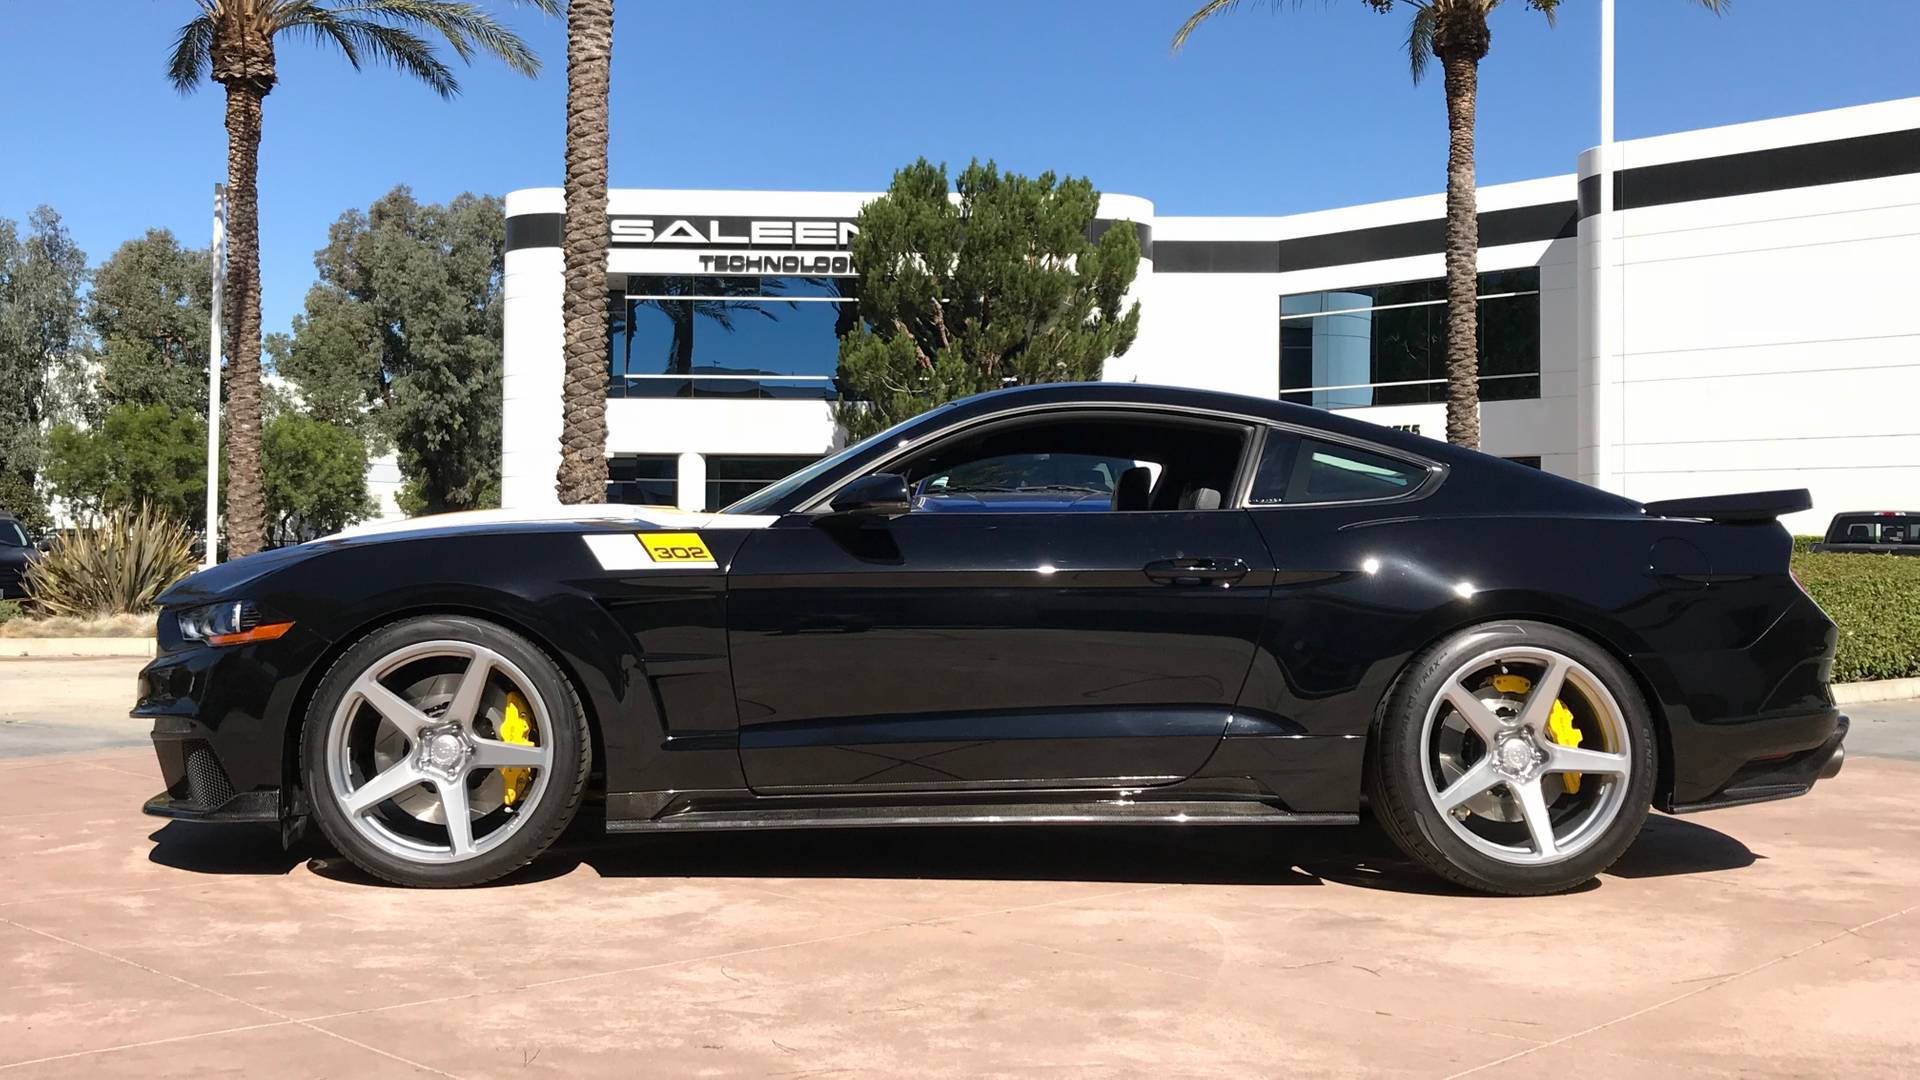 2019 Saleen 35th Anniversary Edition Ford Mustang